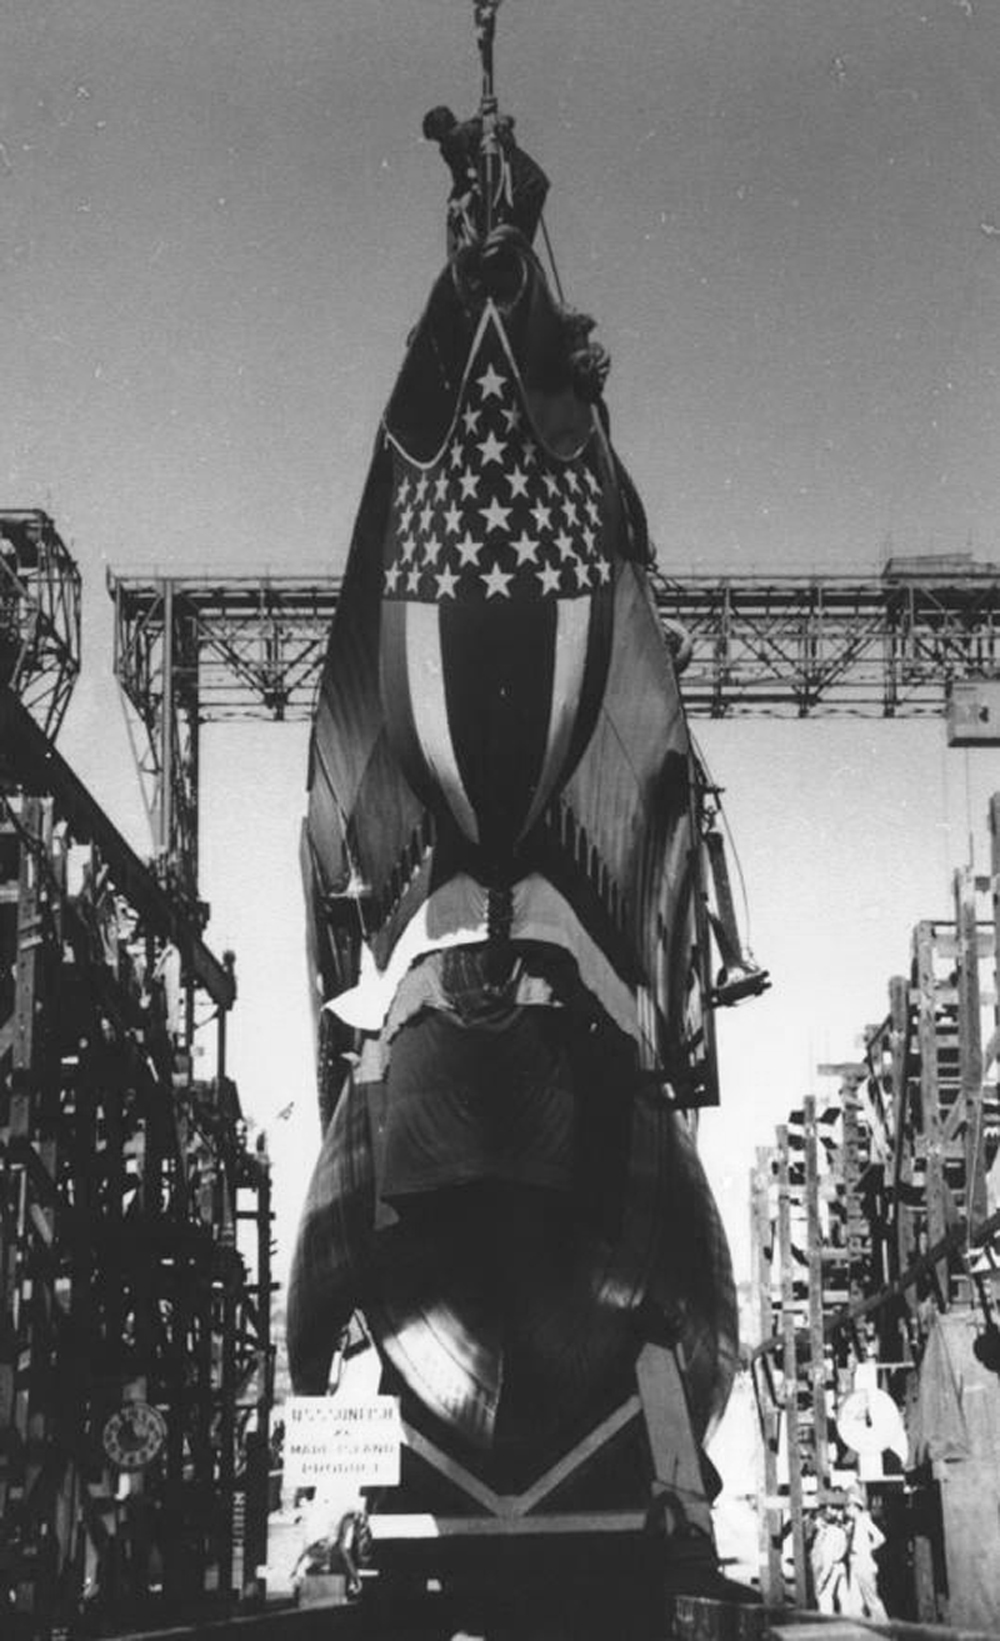 Sunfish preparing for launch, Mare Island Navy Yard, Vallejo, California, United States, 2 May 1942